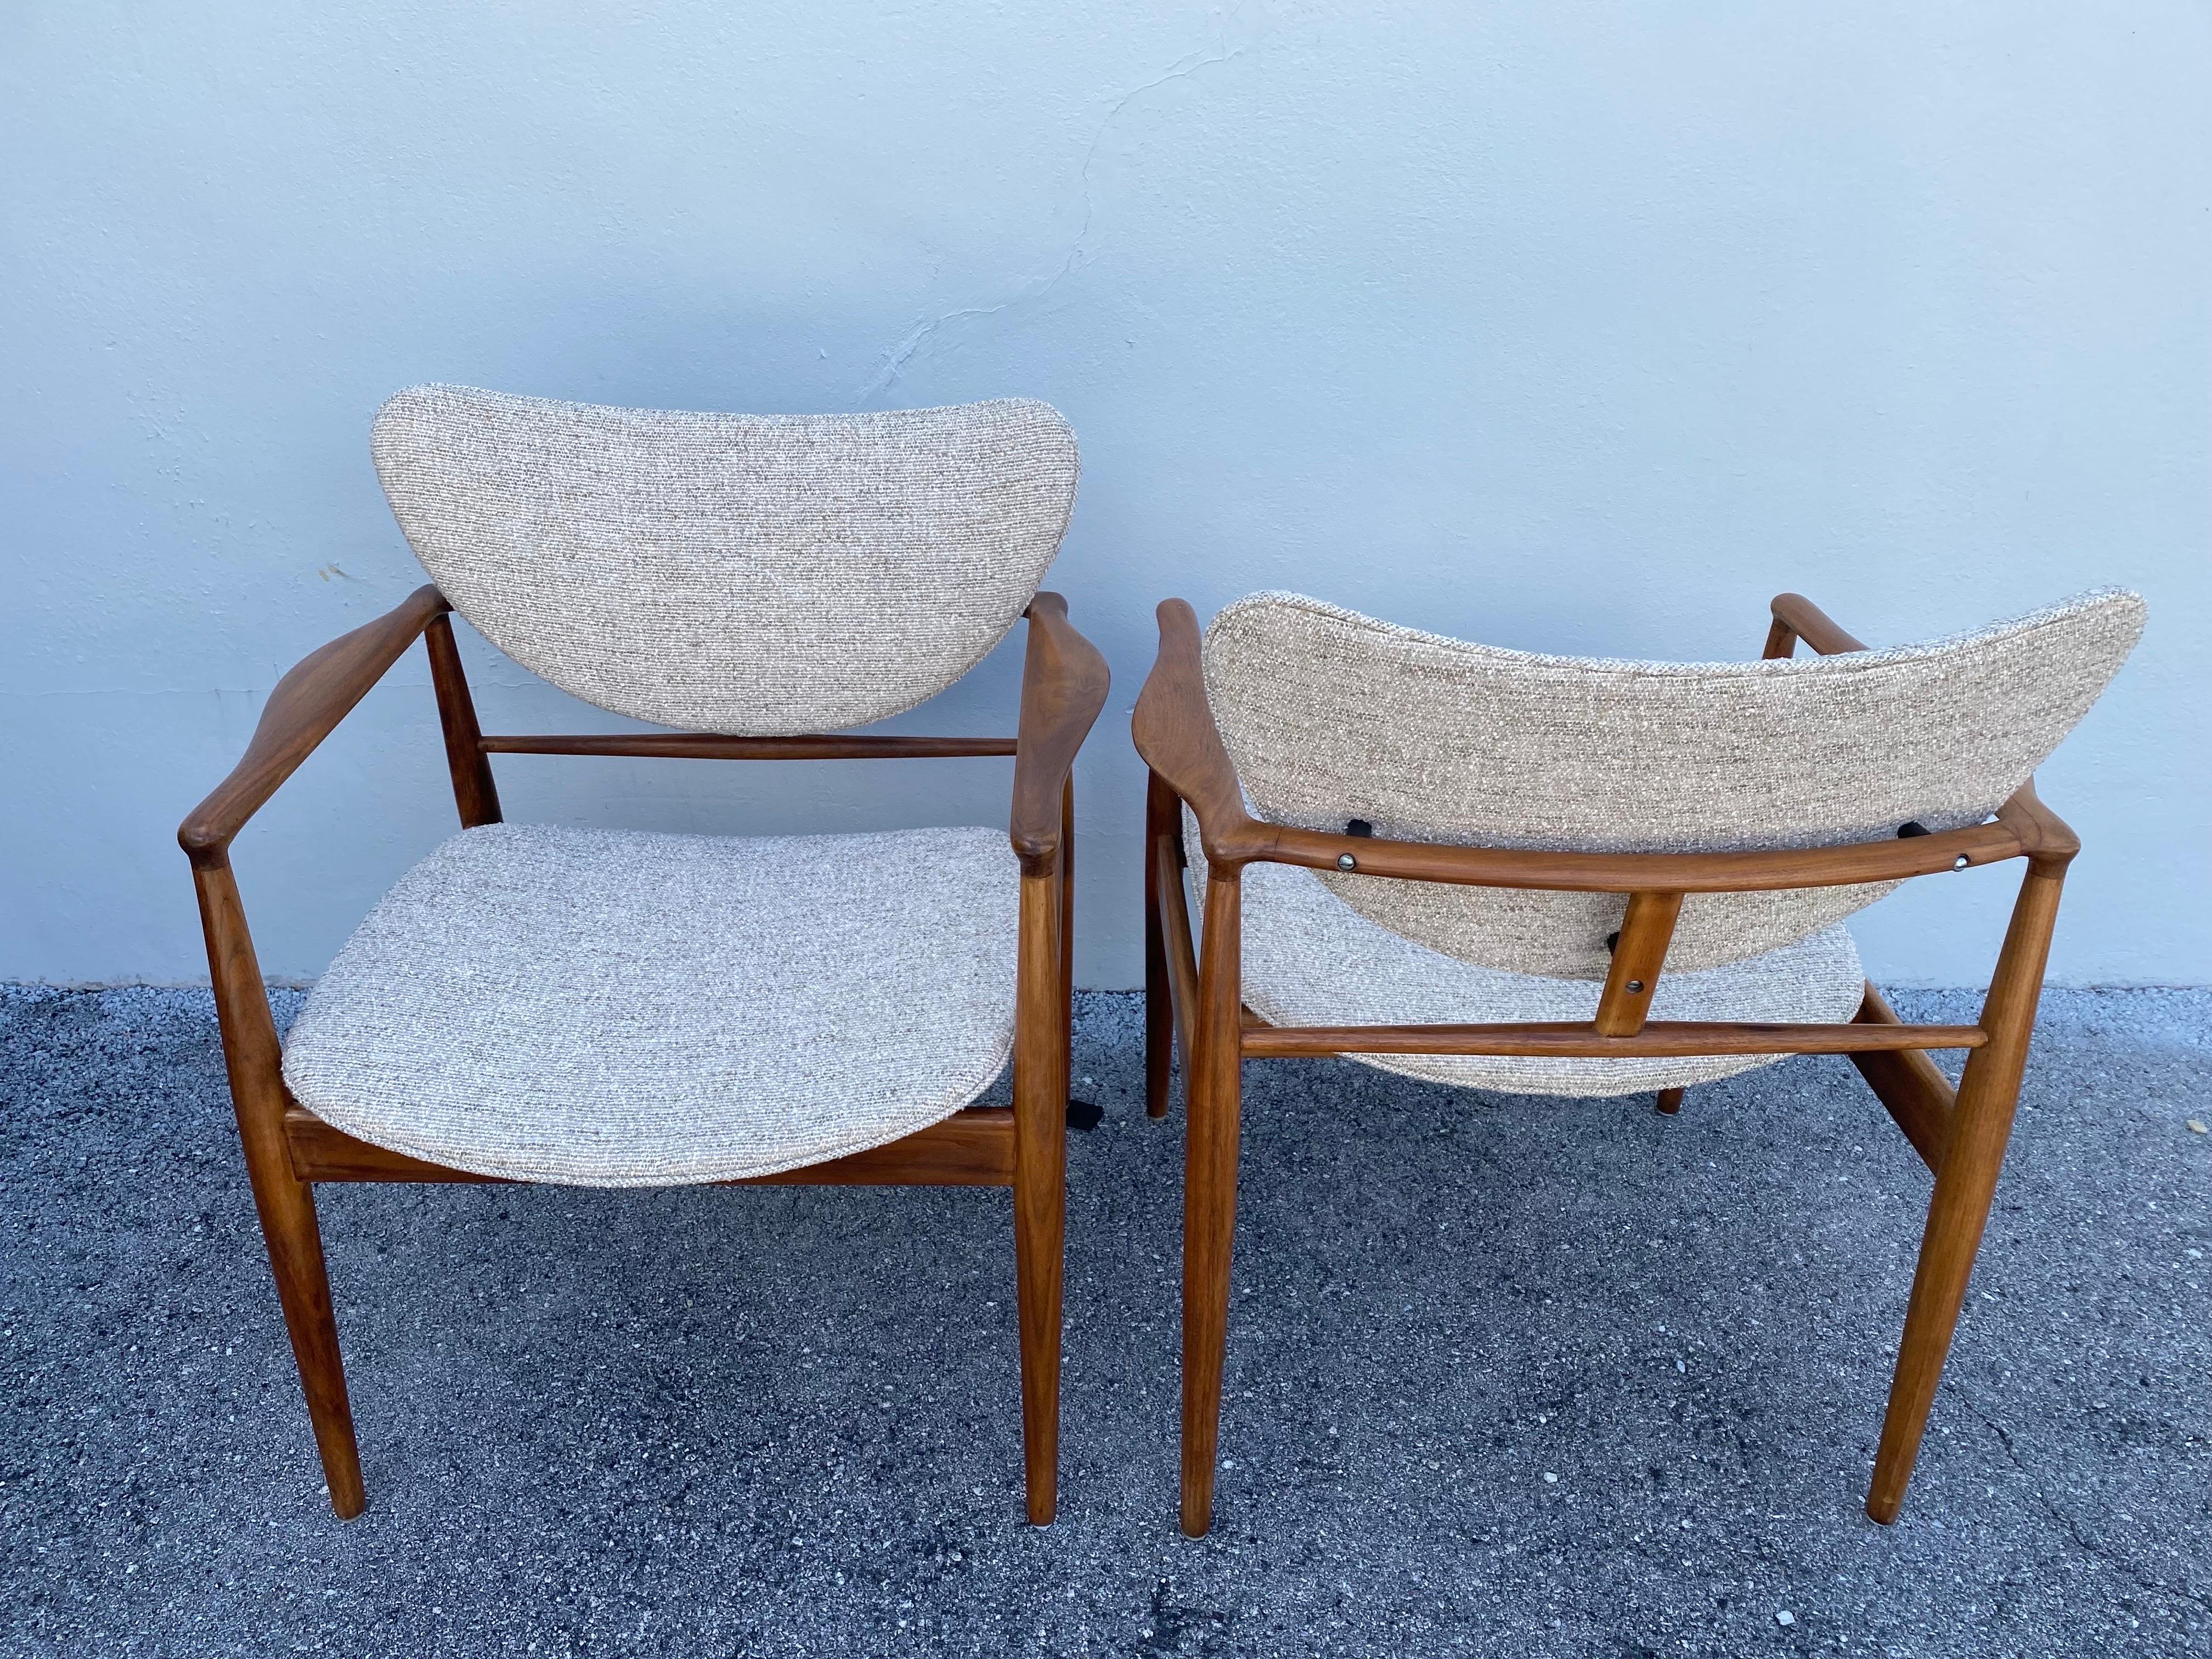 Pair of Finn Juhl No. 48 Danish Modern Chairs for Baker, 1950's In Good Condition For Sale In East Hampton, NY